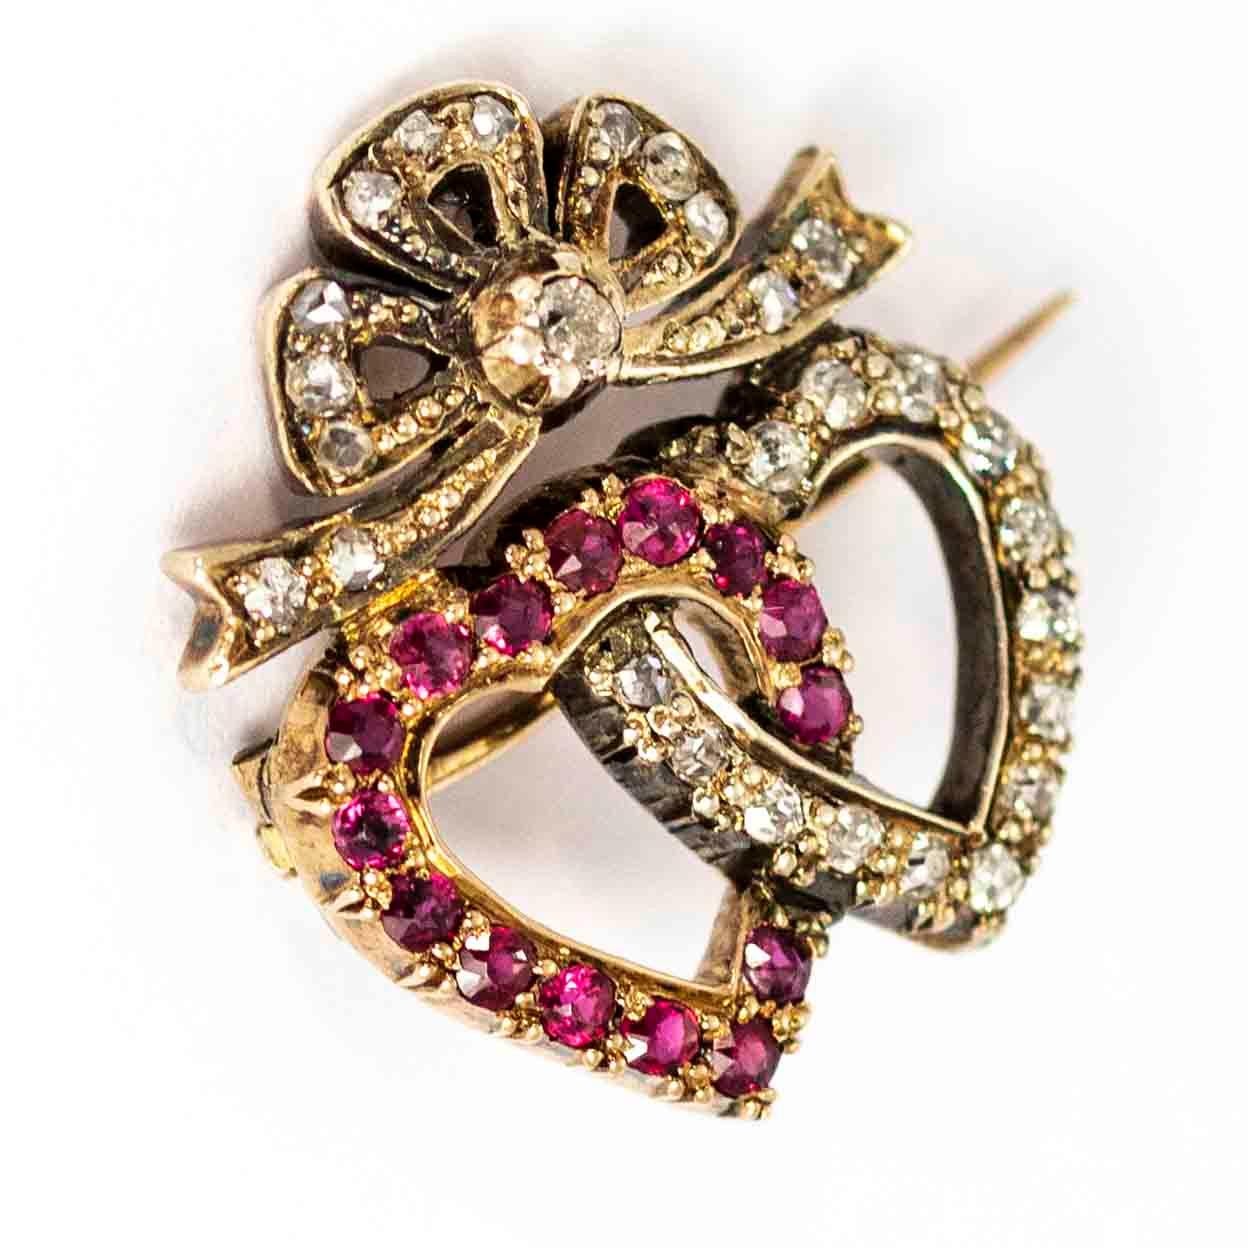 Old Mine Cut Vintage 18 Carat Gold Diamond and Pink Topaz Linked Heart Brooch